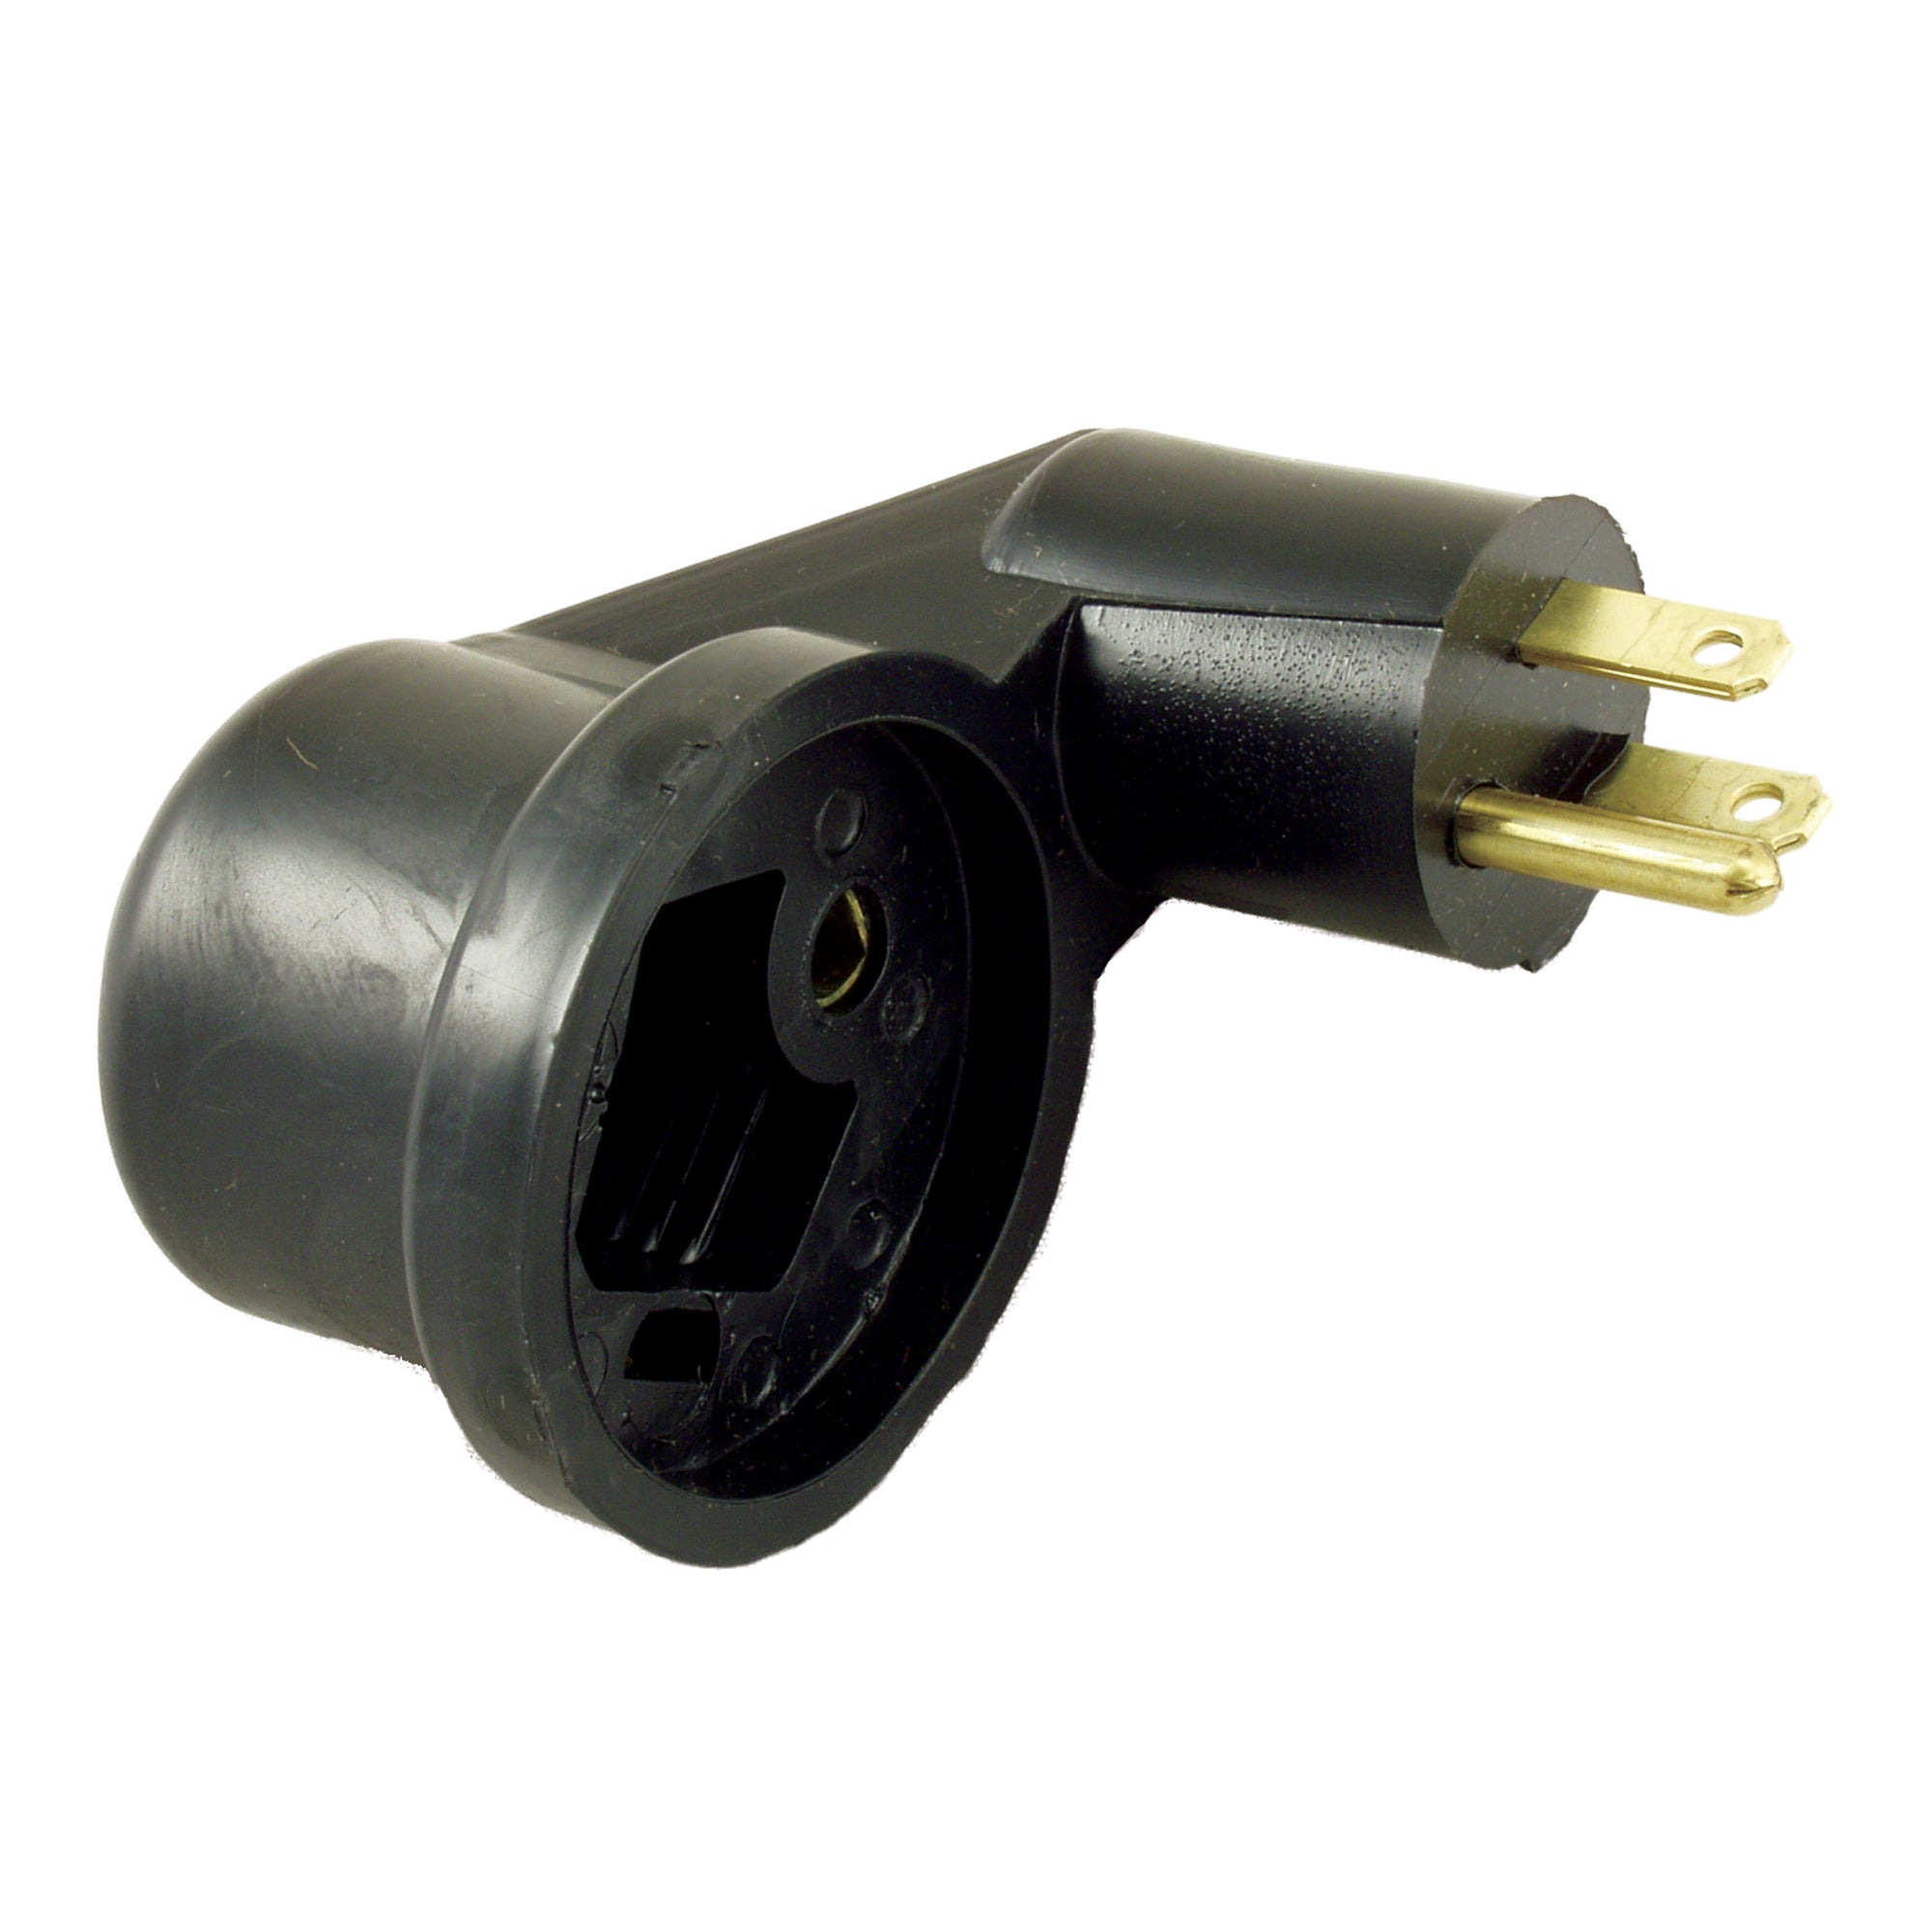 JR Products M-3022-A Flip-Flop Adapter - 15 Amp Male to 30 Amp Female